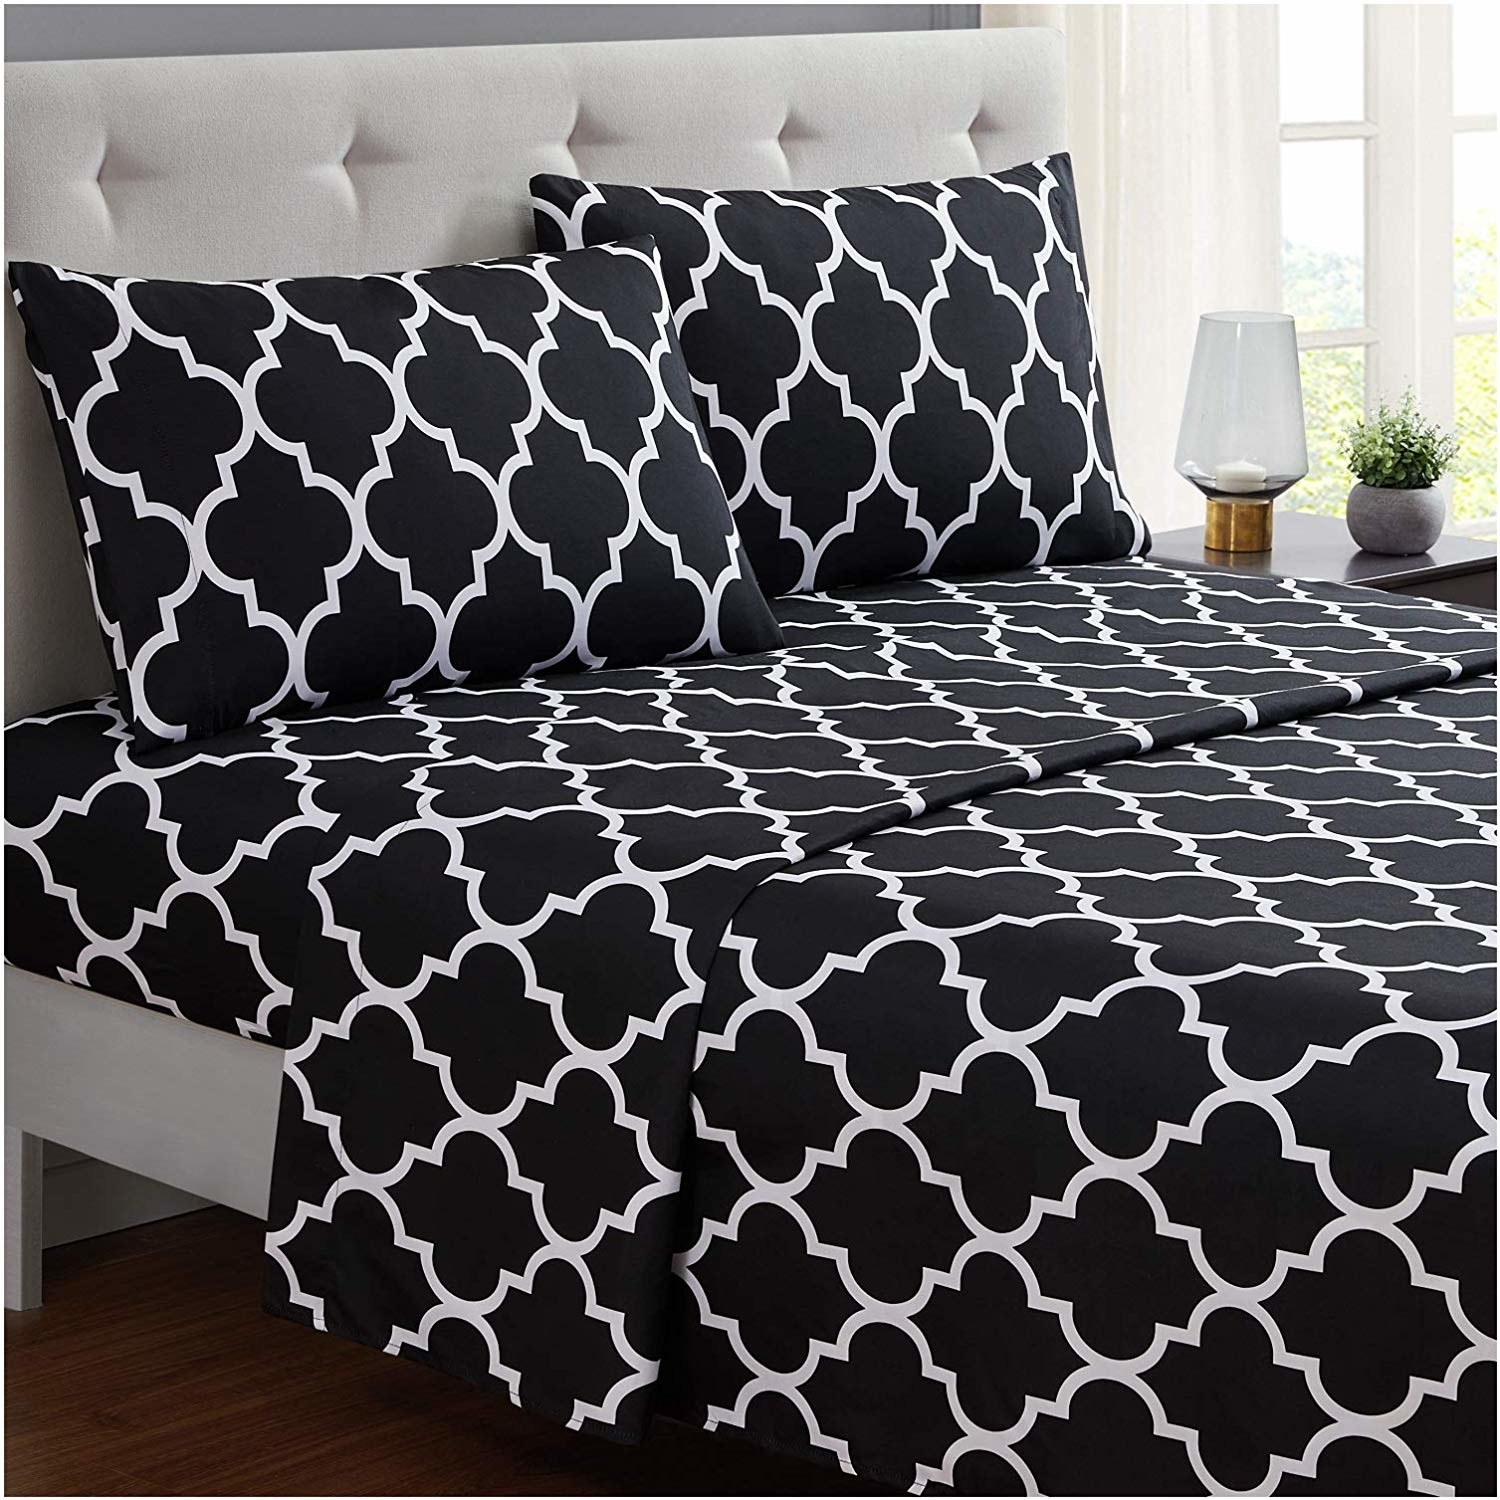 sheets on the bed along with the pillowcases. they&#x27;re white and black.